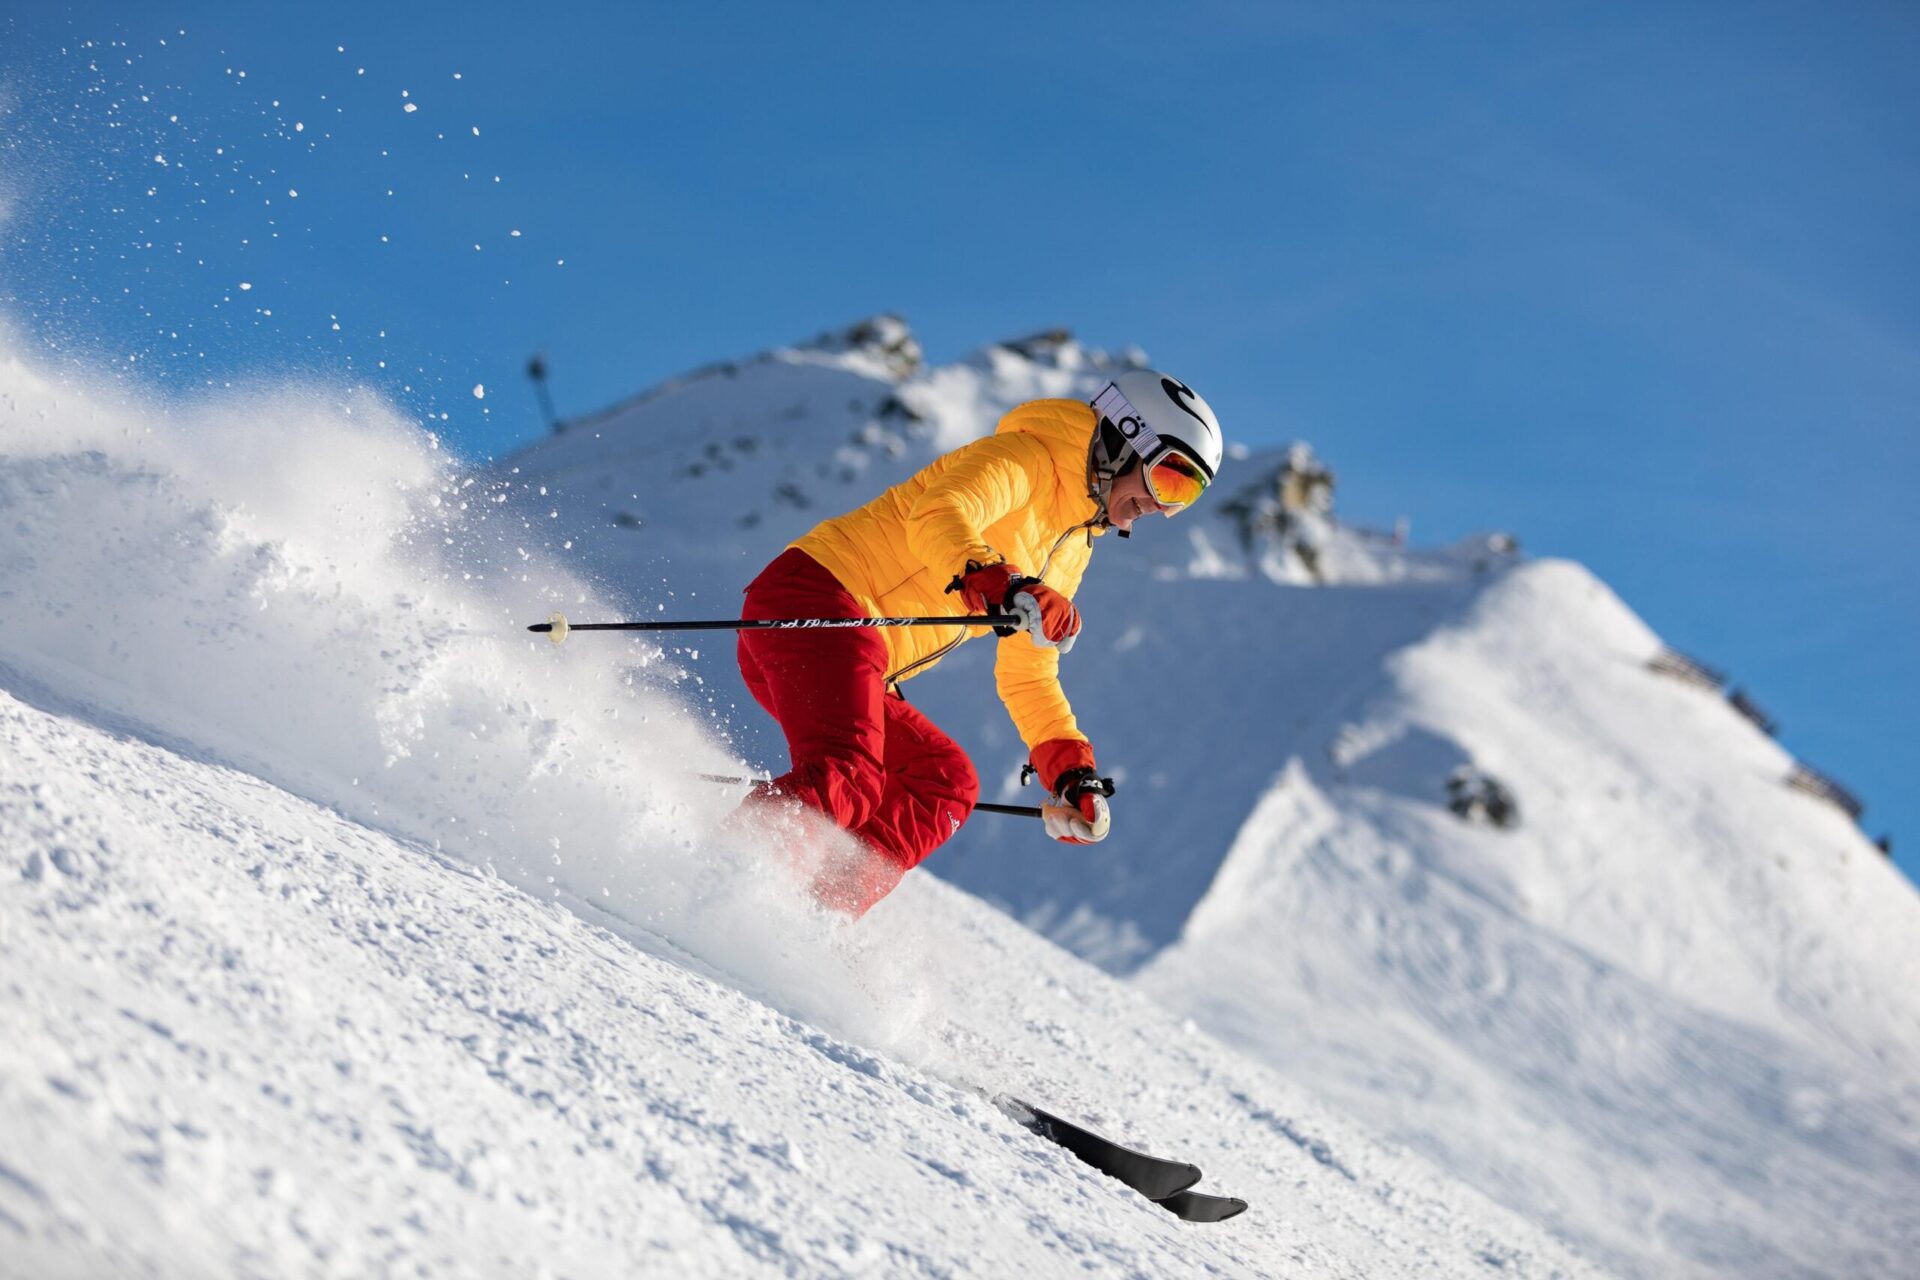 Ergonomics in Sports; Tips for Skiing and Snowboarding